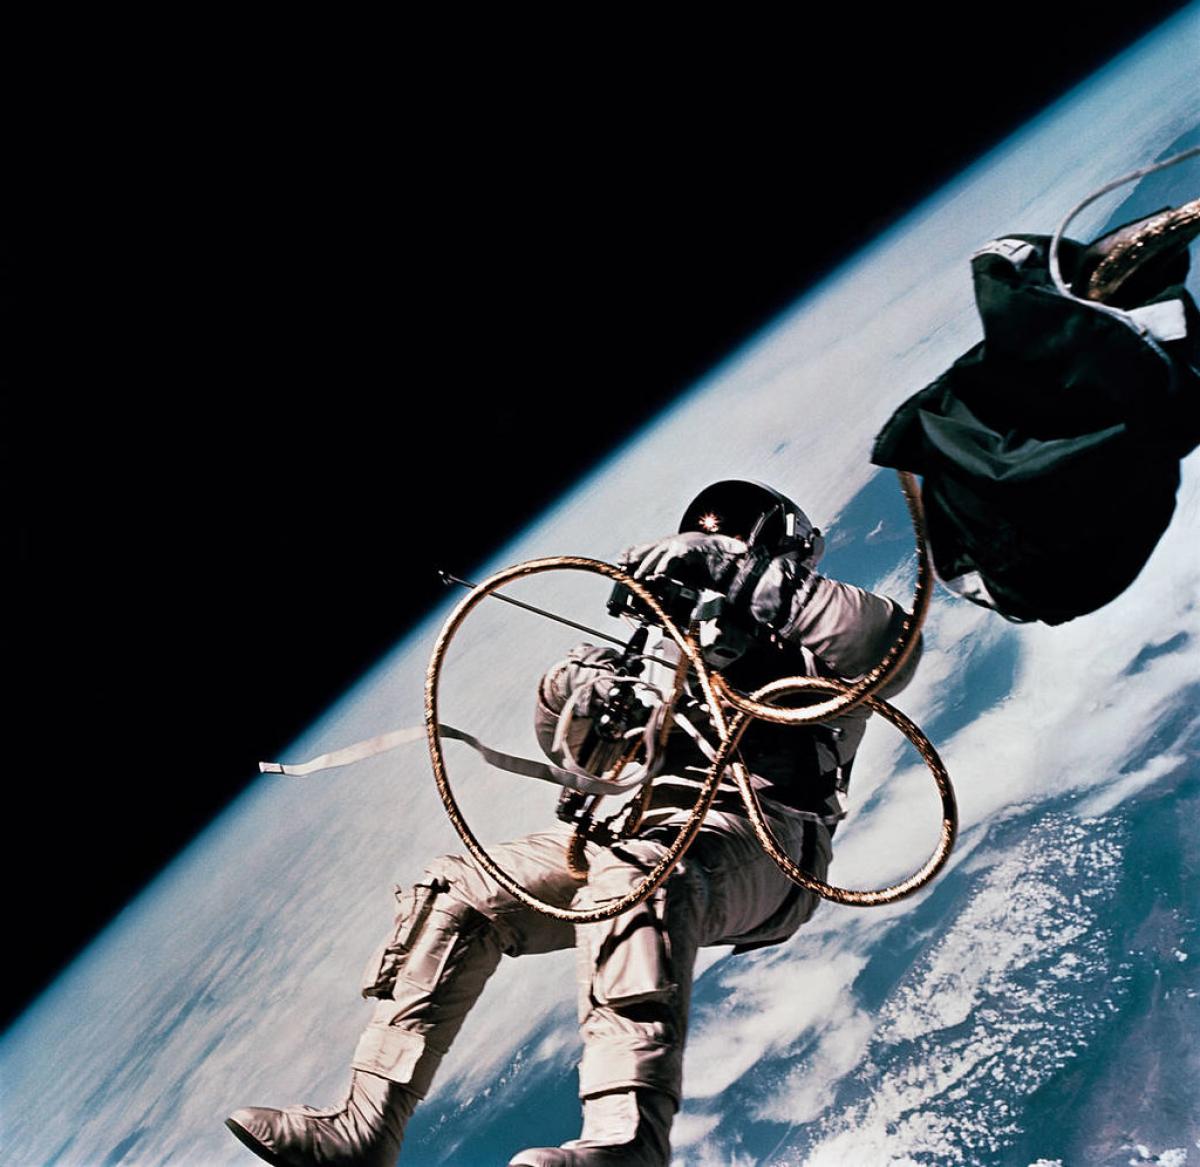 An astronaut floats with a tether in space with Earth seen partially in the background